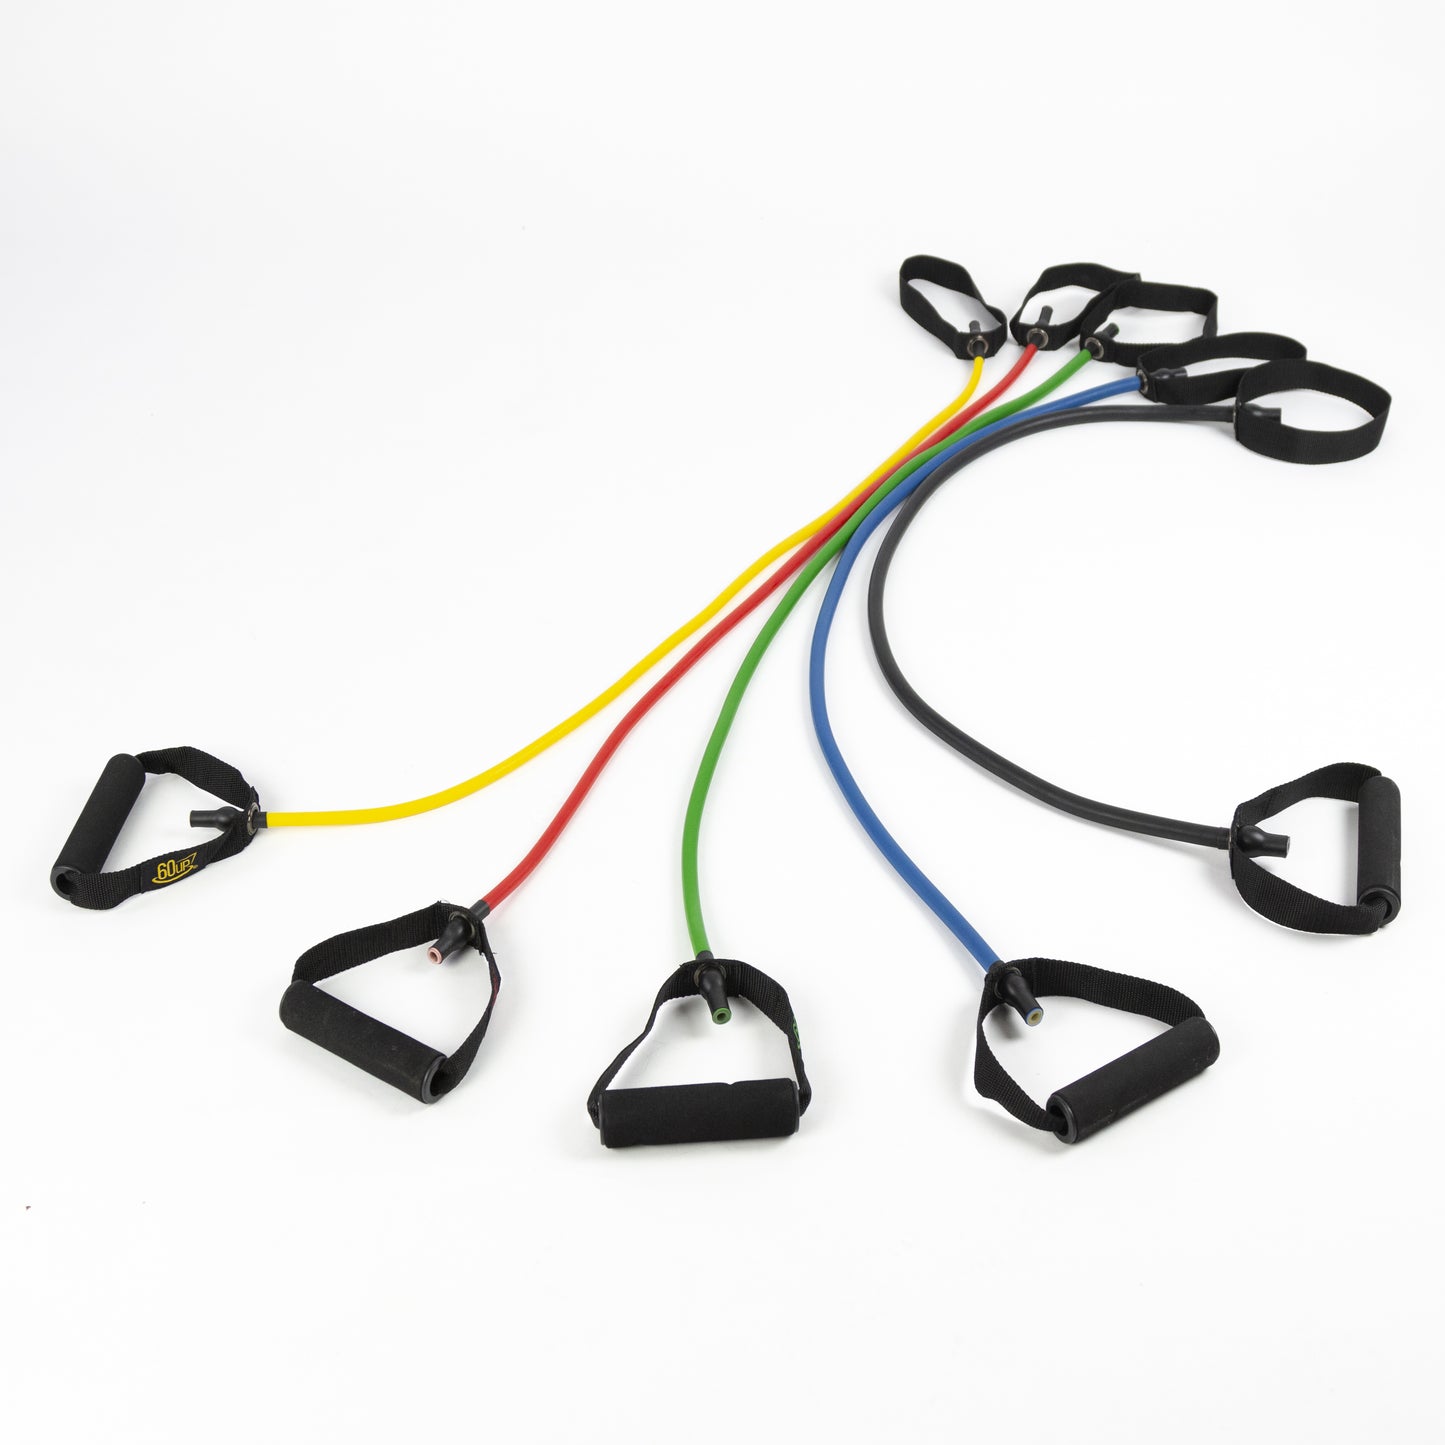 60uP® "Intro" Resistance Bands (Level 1)